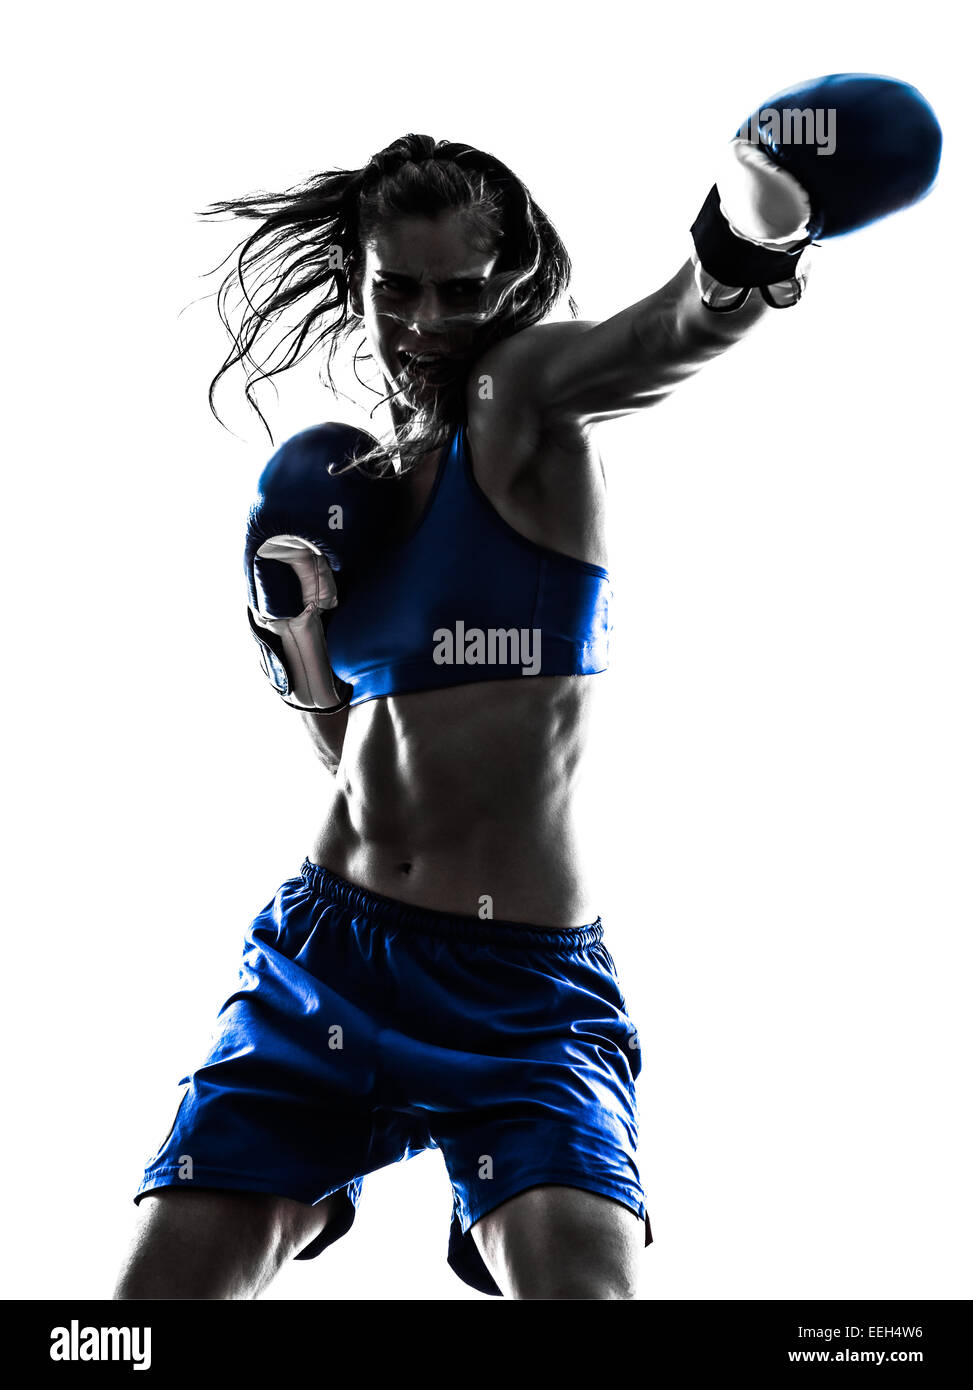 Shadow Boxing Photos, Download The BEST Free Shadow Boxing Stock